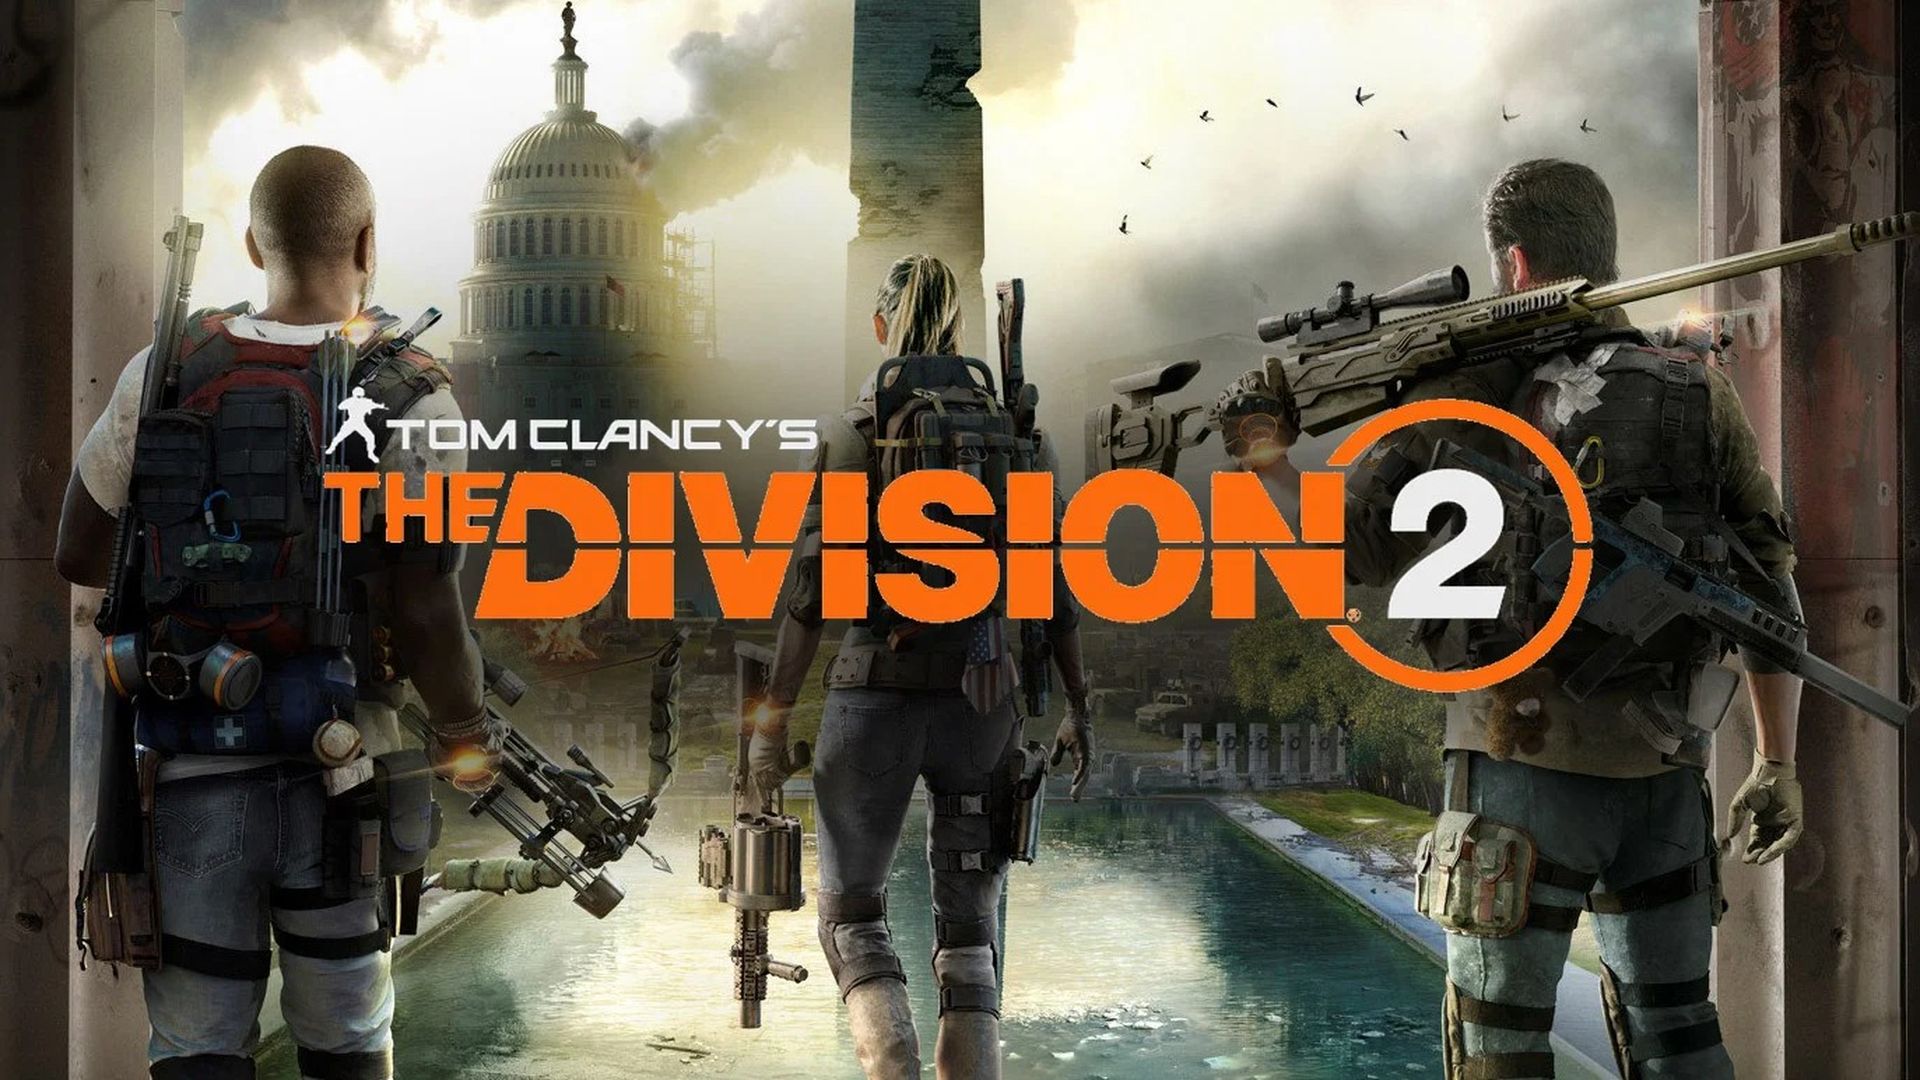 Today we are going to explain The Division 2 proficiency rank system.